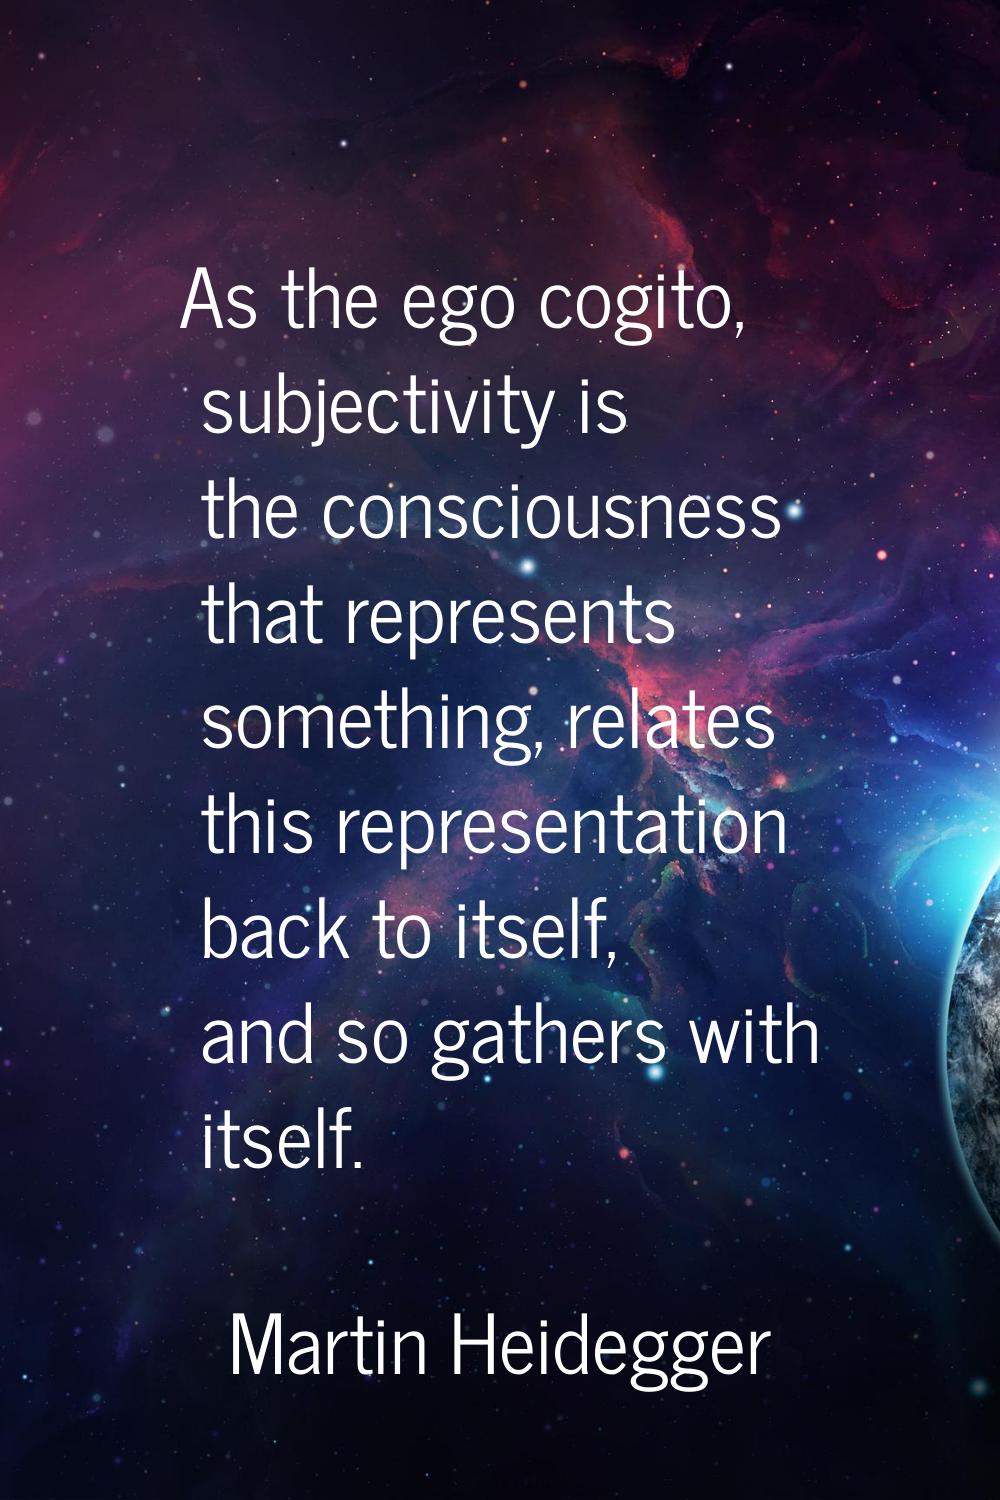 As the ego cogito, subjectivity is the consciousness that represents something, relates this repres